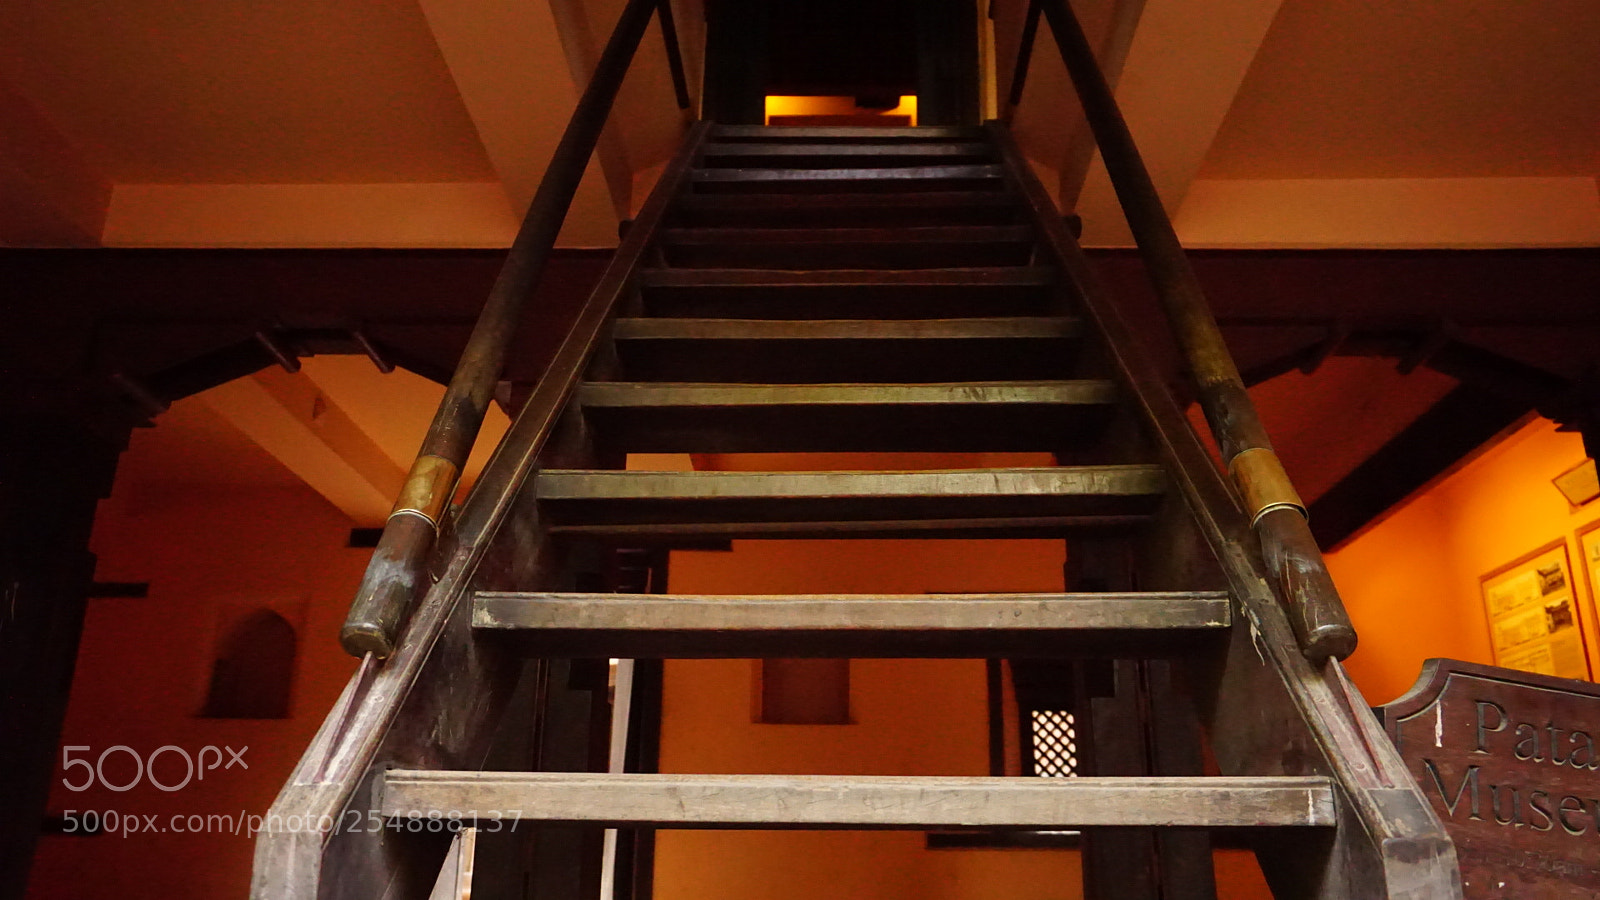 Sony a6000 sample photo. Staircase inside the patan photography